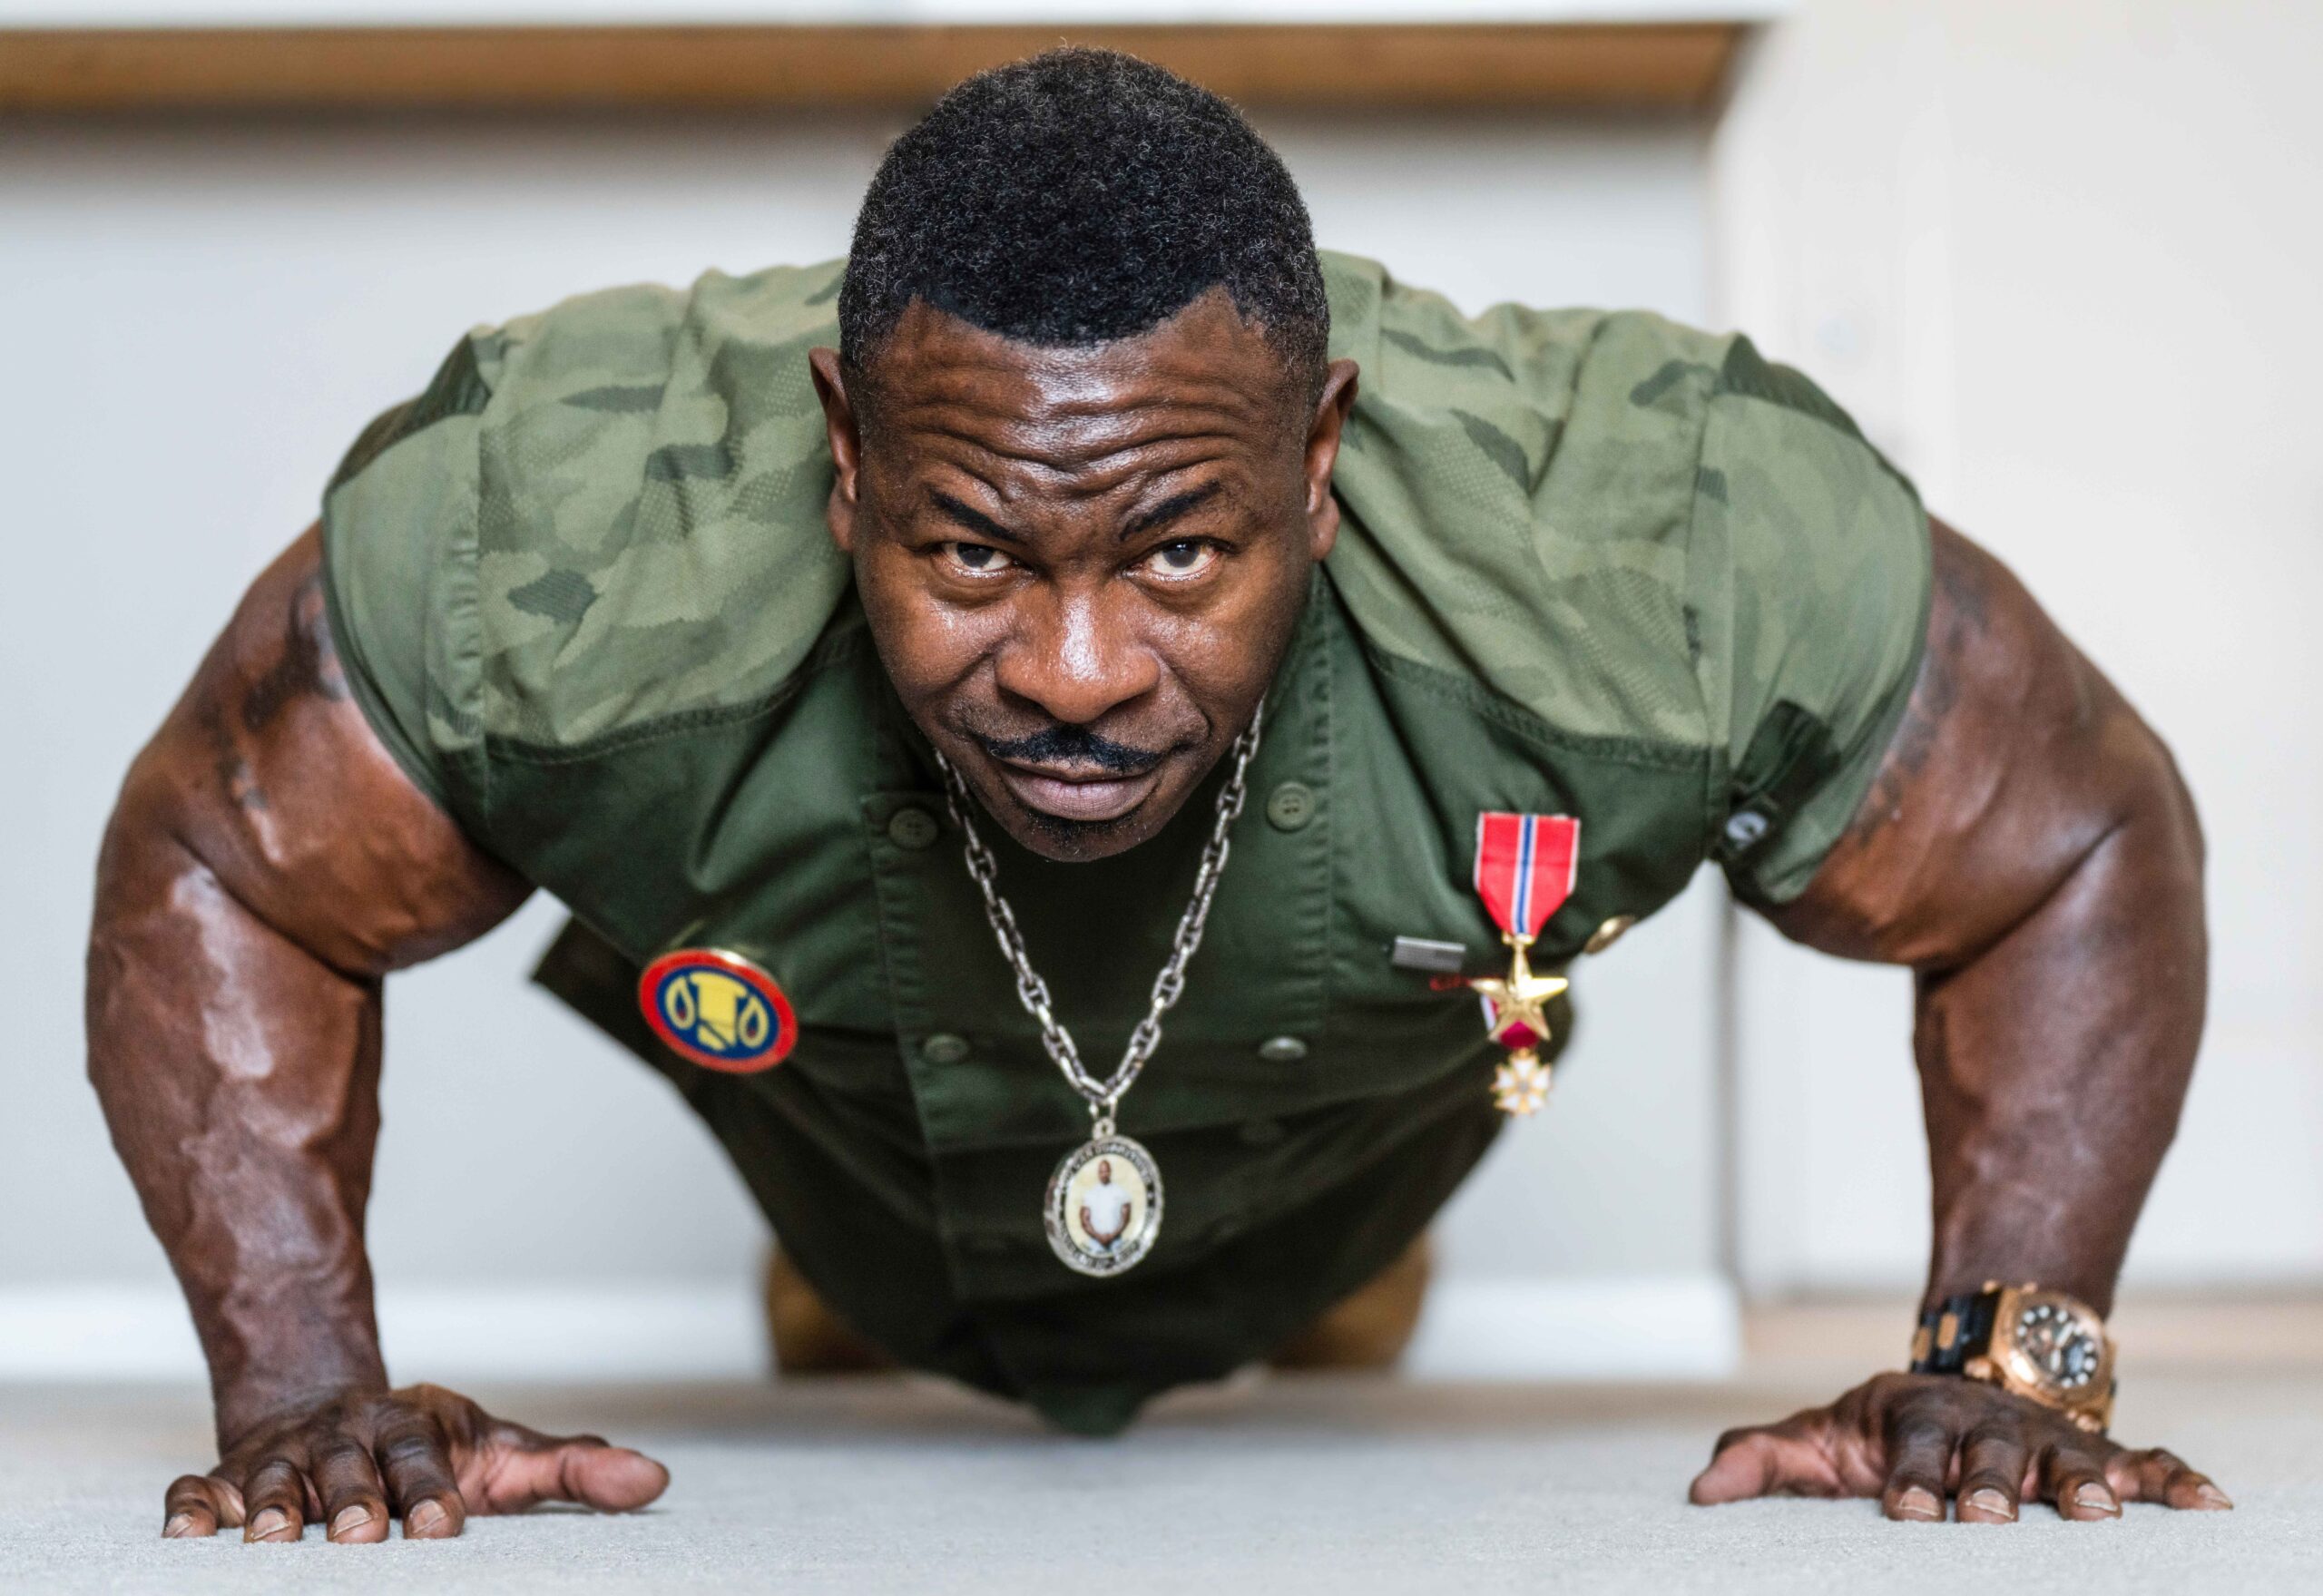 Chef Andre Rush does 2,222 pushups a day